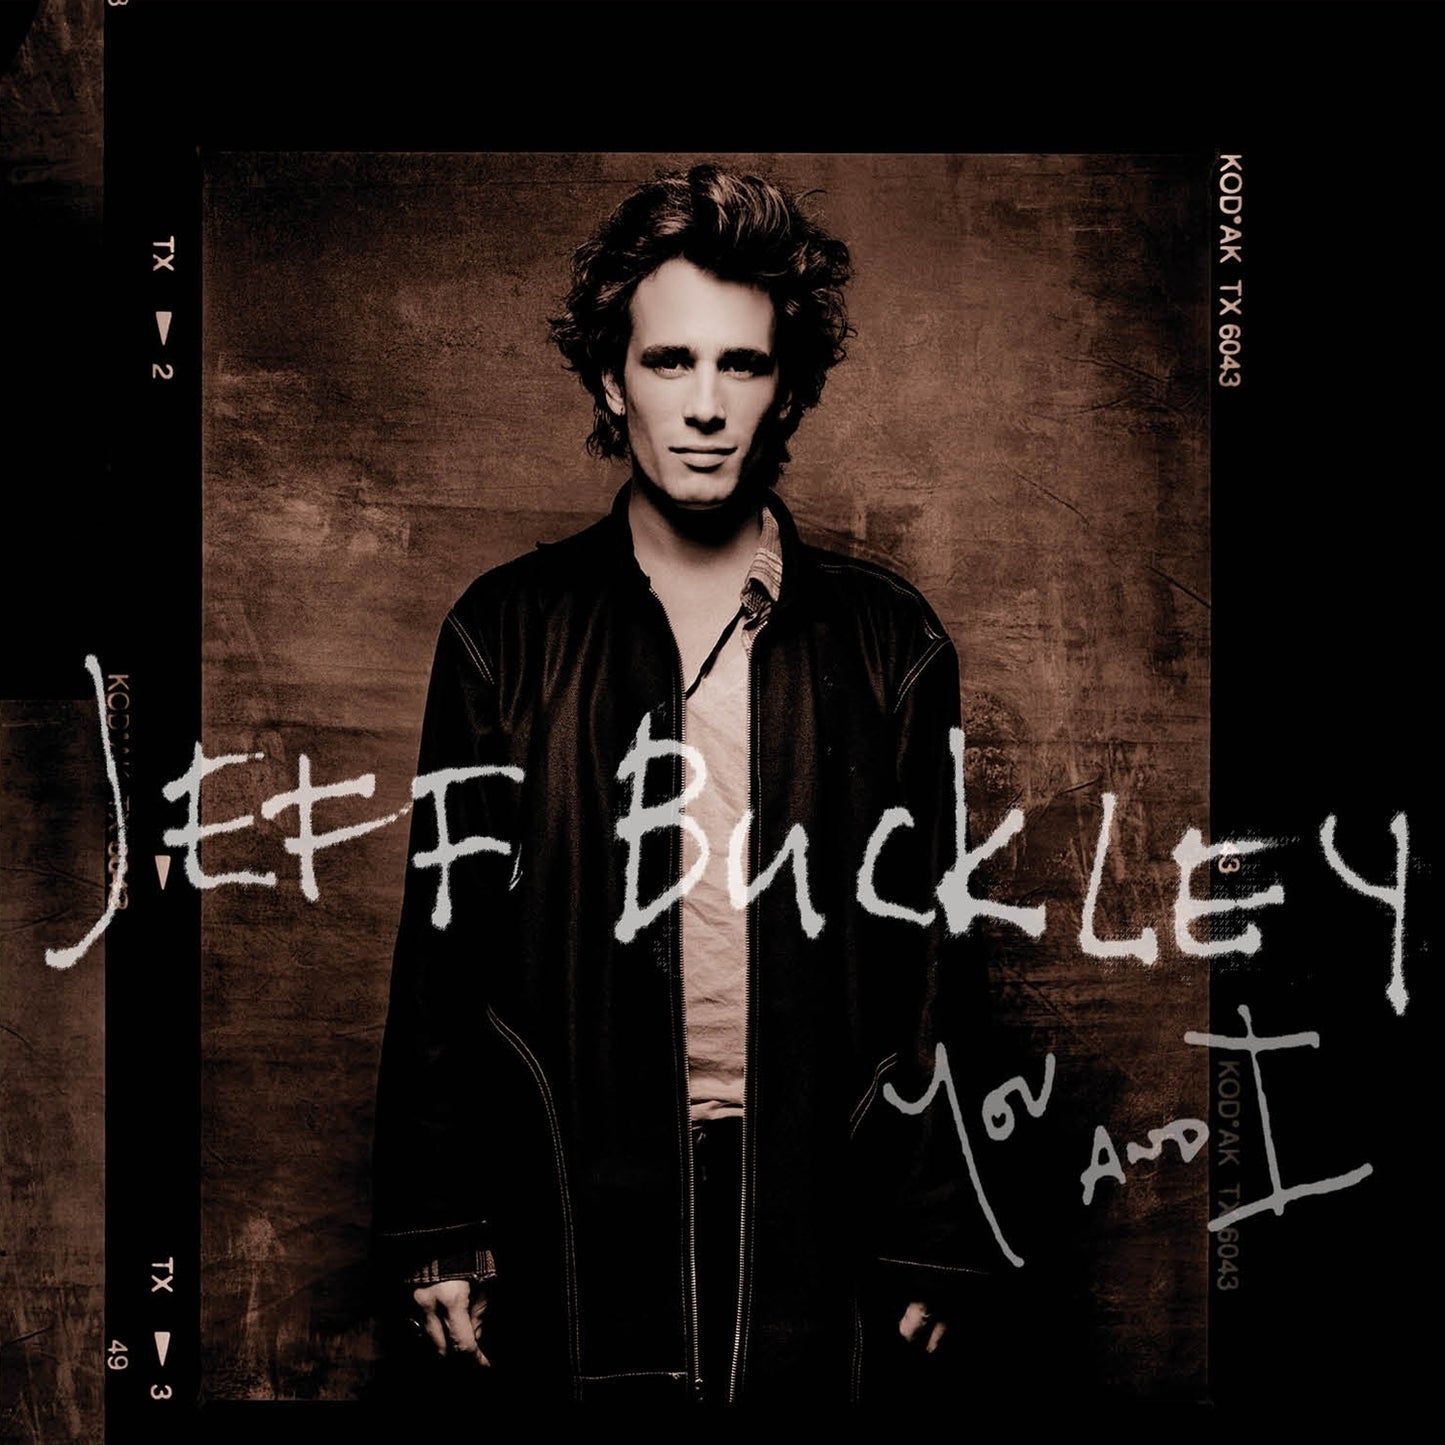  Jeff Buckley – You And I | Buy the Vinyl LP from Flying Nun Records